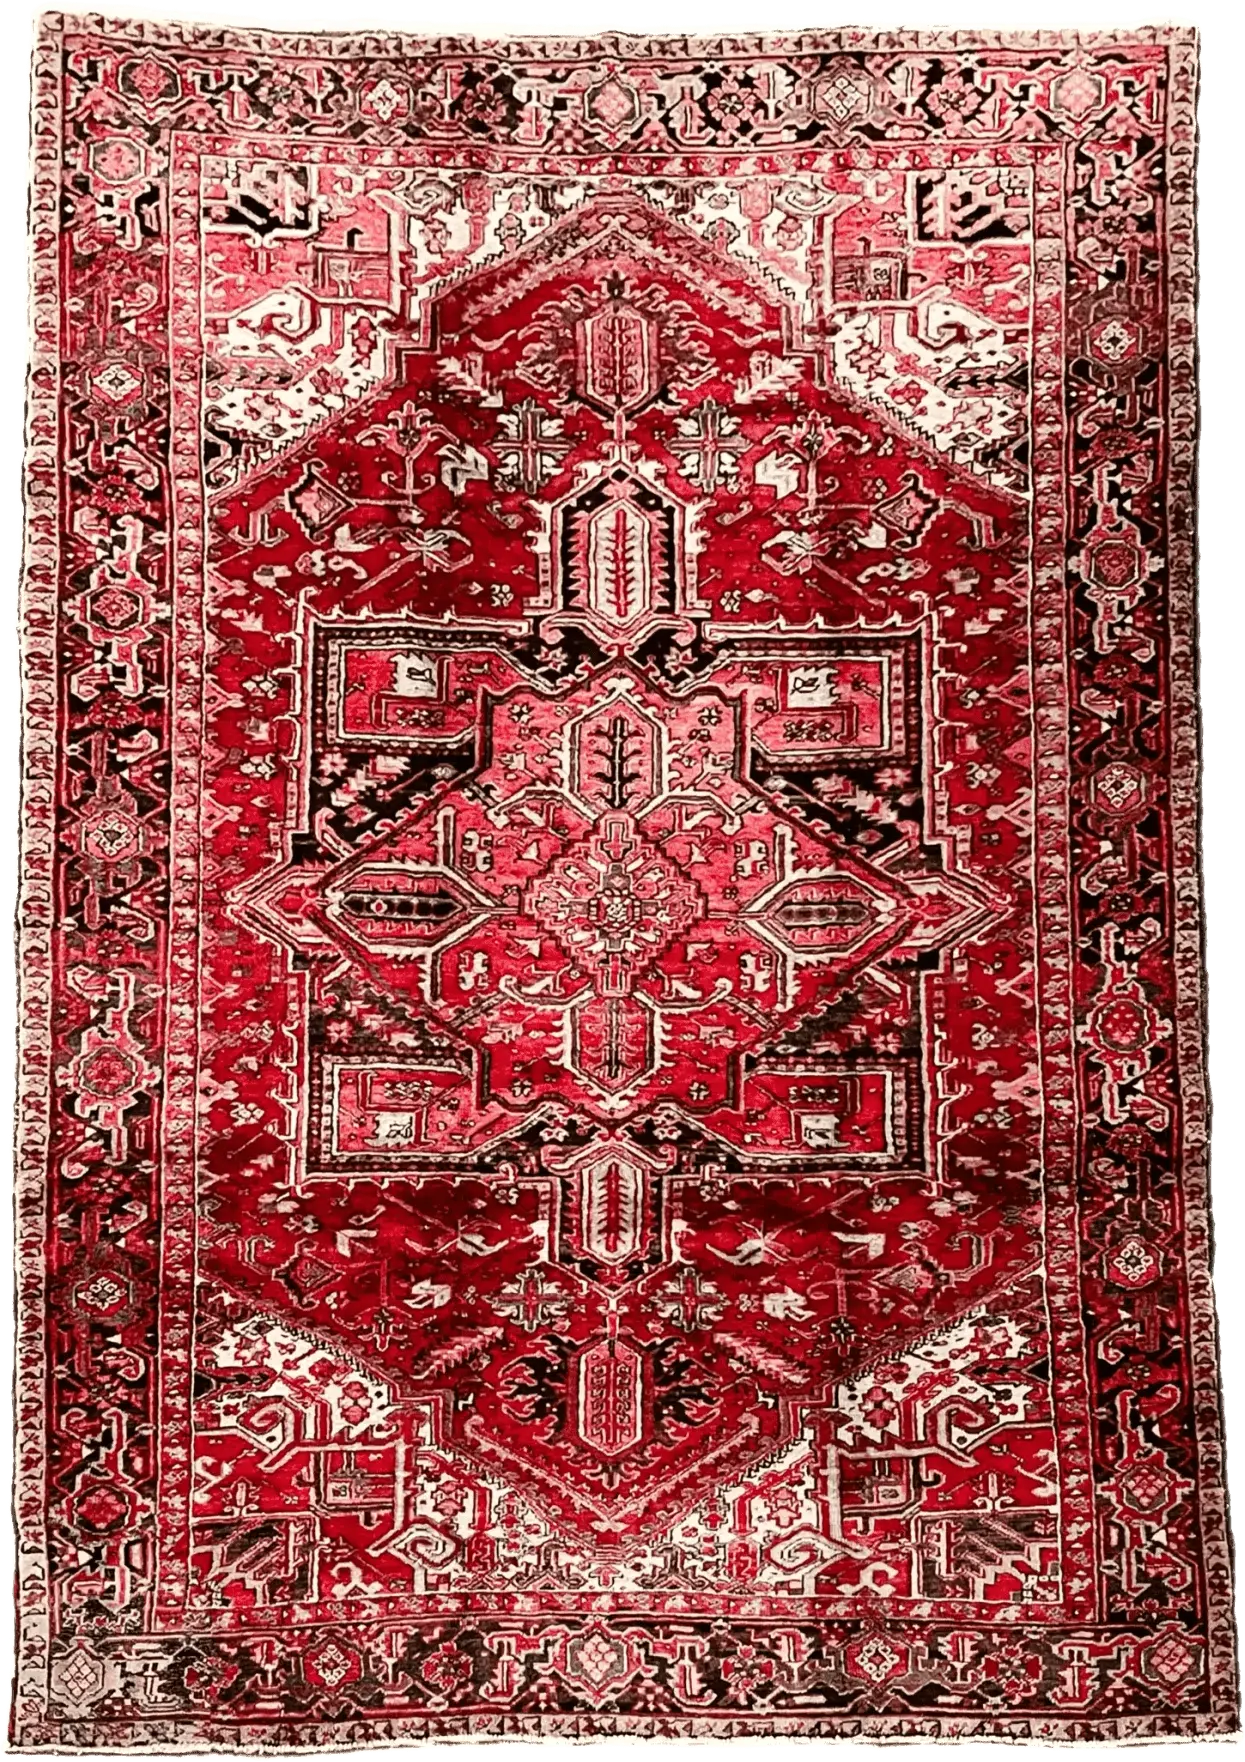 Vintage Hand Knotted Rug # 3069 | 7’ 2” x 10’ 8” - Krazy For Rugs